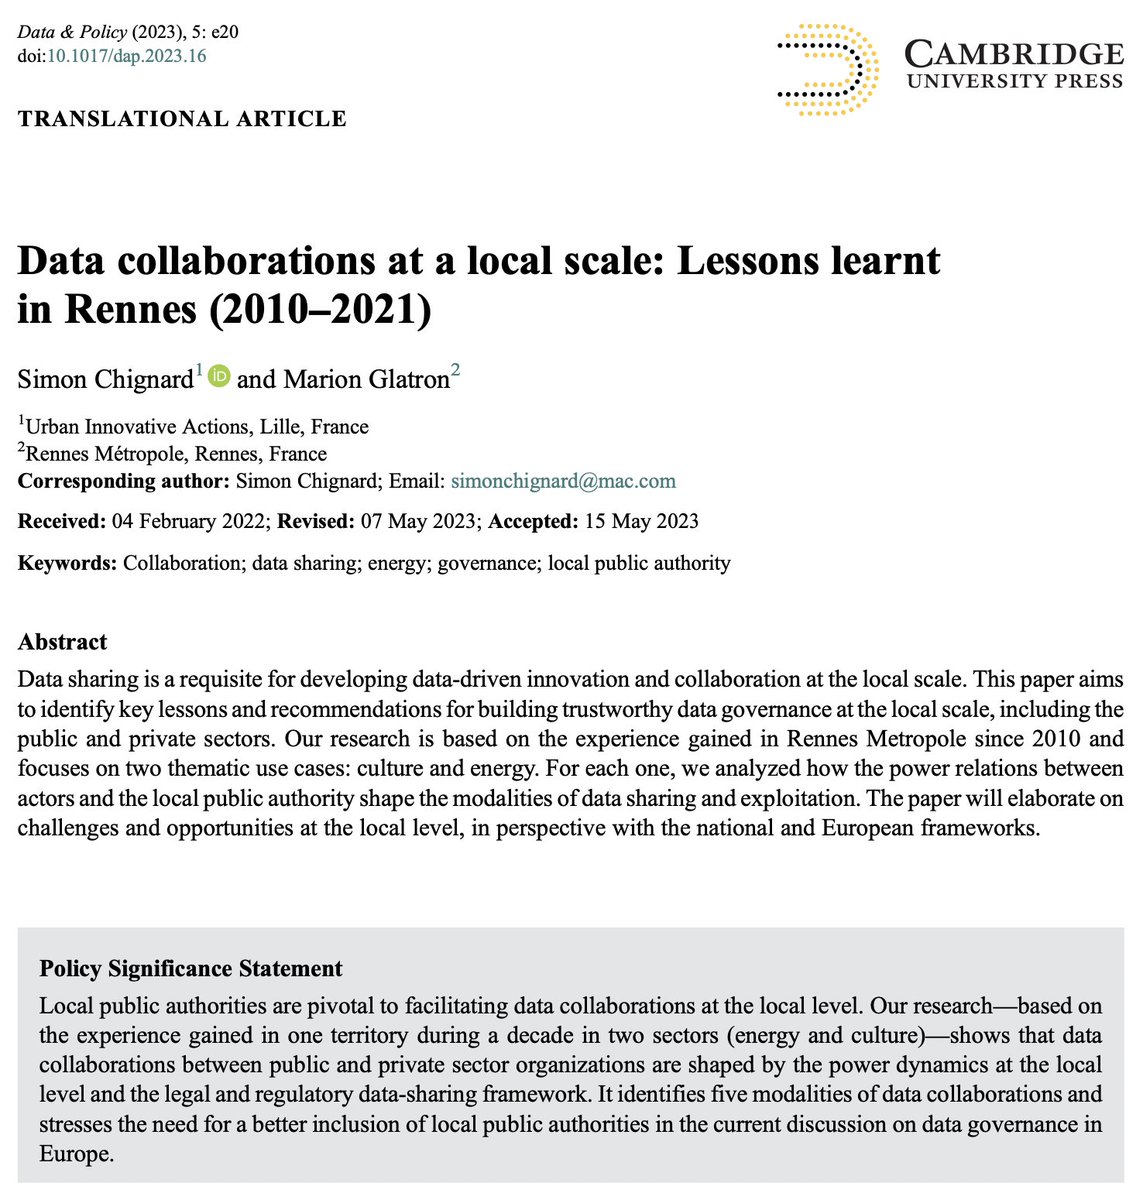 Data collaborations at a local scale: lessons learnt in Rennes (2010–2021)

@SChignard & Marion Glatron

→ doi.org/10.1017/dap.20…

#DataCollaboration #DataSharing #EnergySector #CulturalSector #DataGovernance #LocalGovernment #EuropeanStrategyforData #France #RennesMetropole 🇫🇷